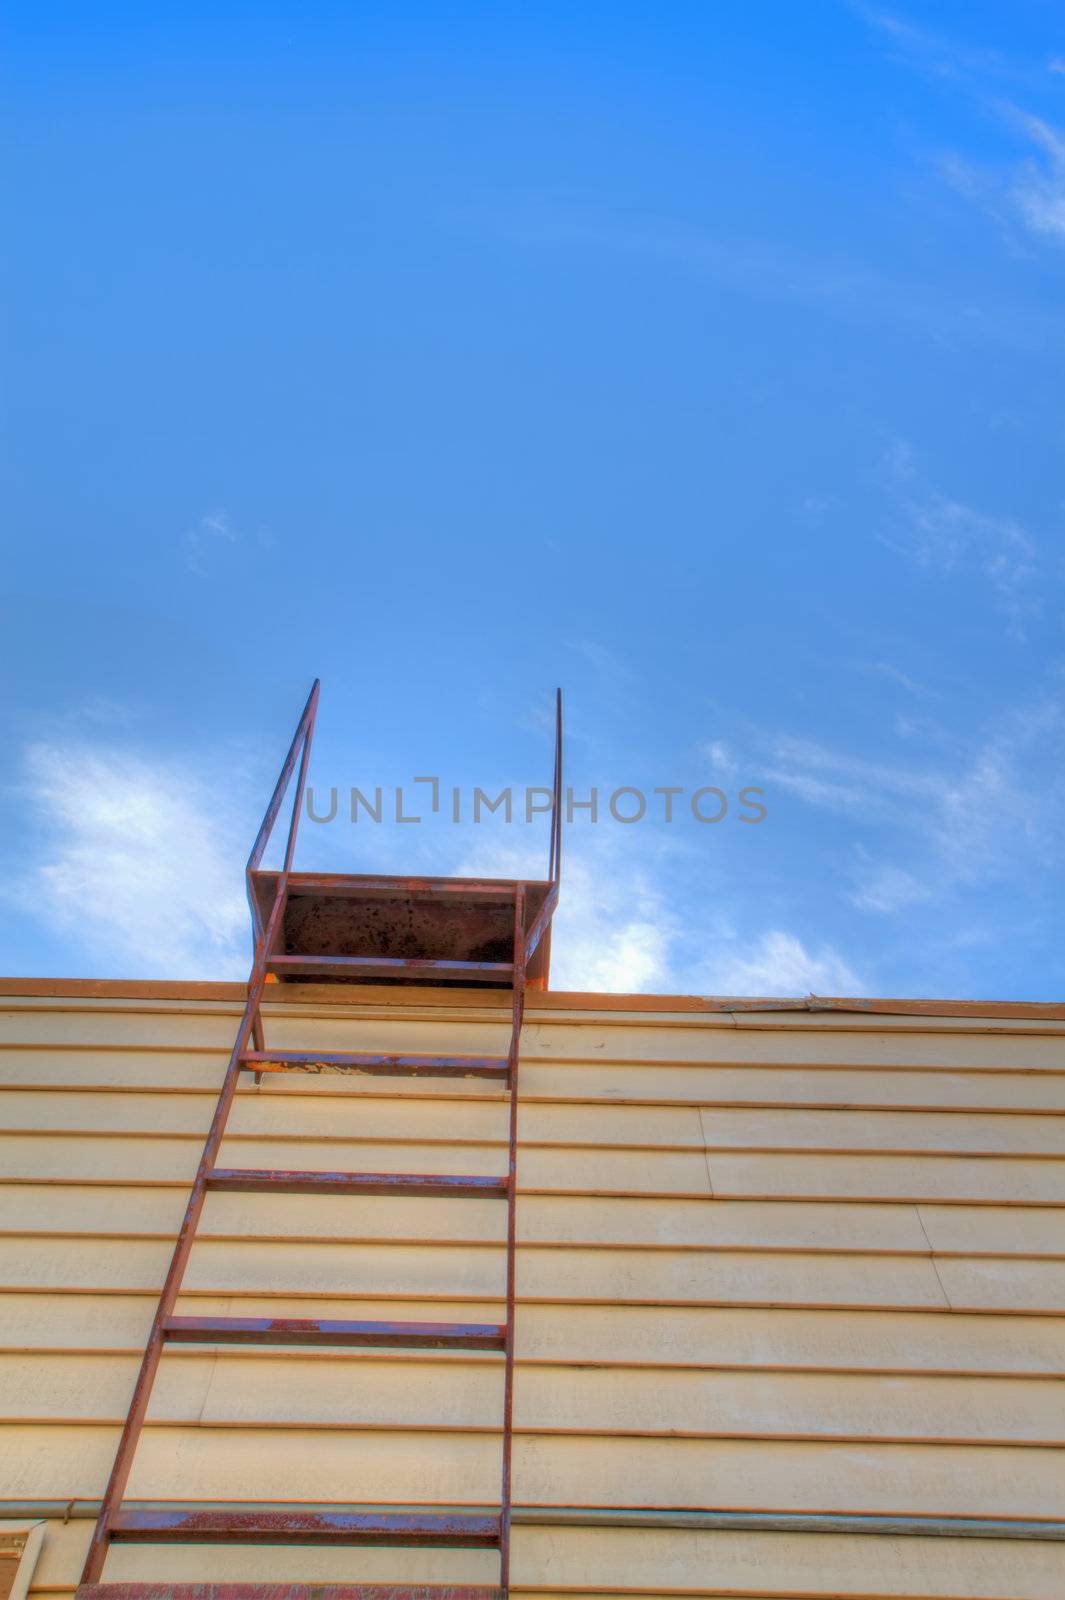 Ladder to the more sky hdr by bobkeenan